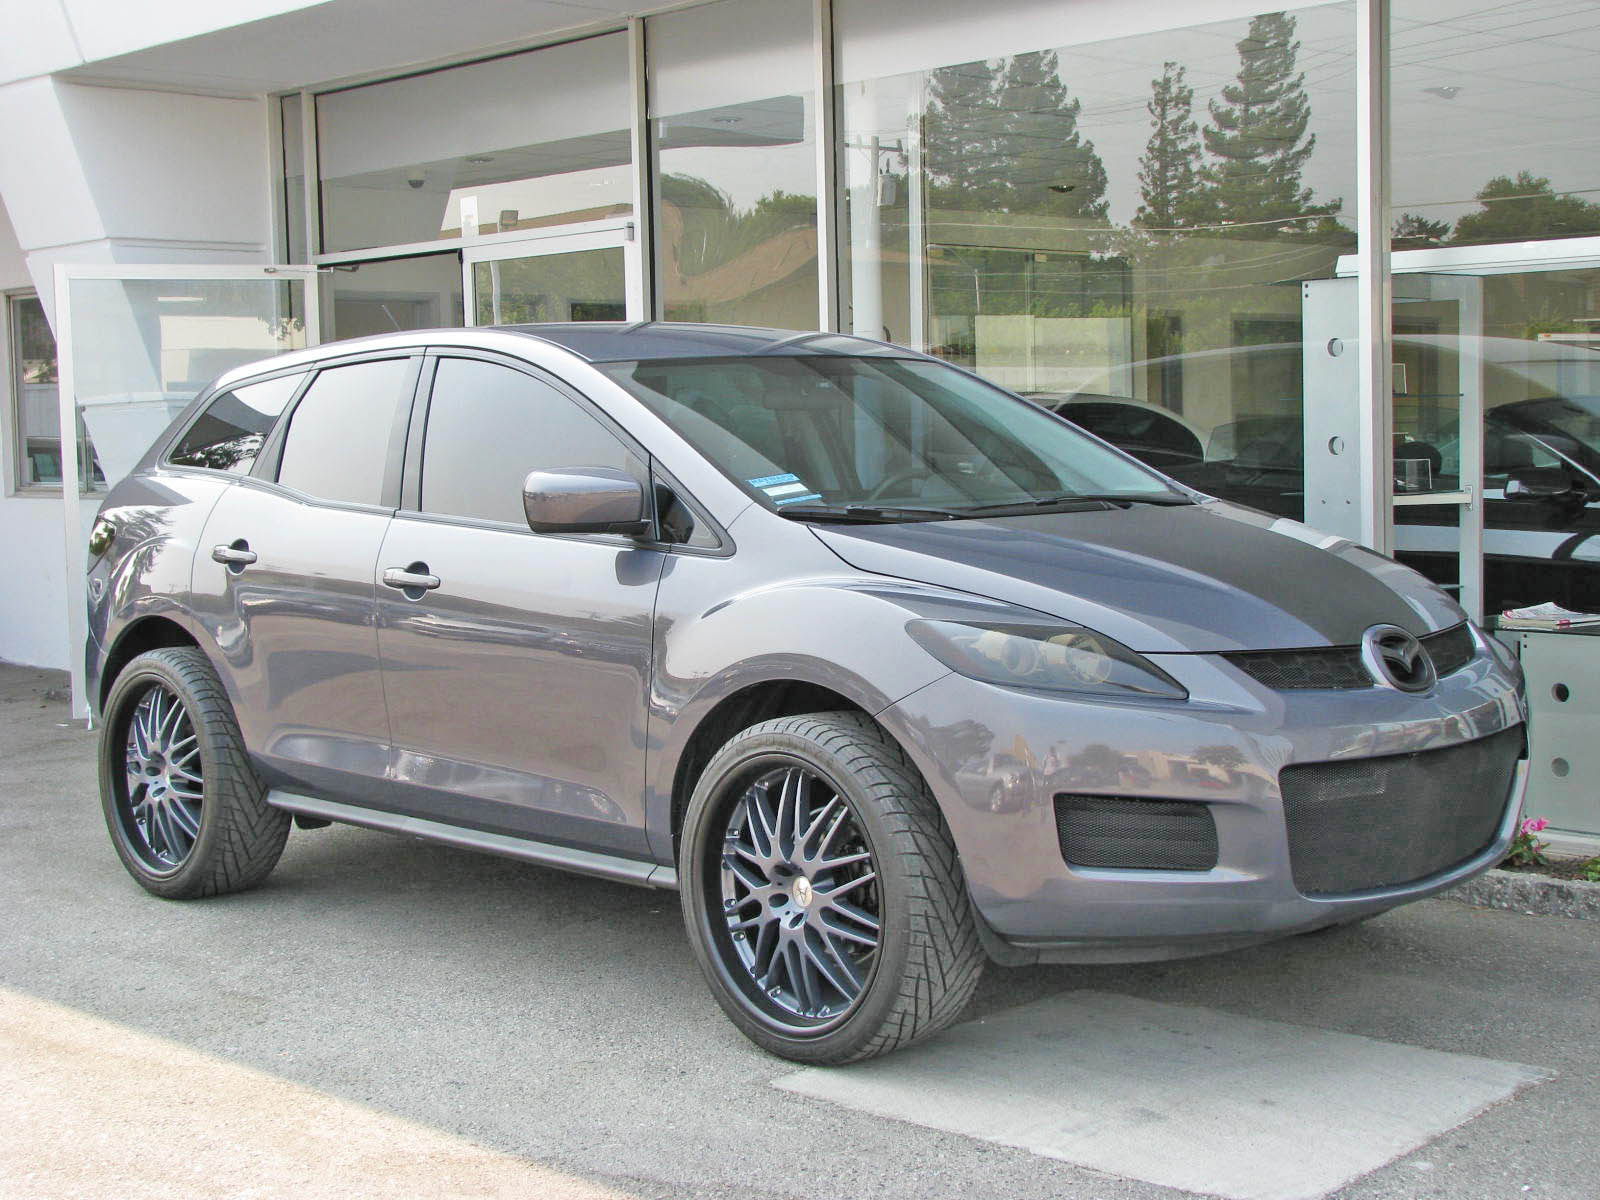 2007 Mazda CX7 SHOW CAR 22" Wheels and much much more